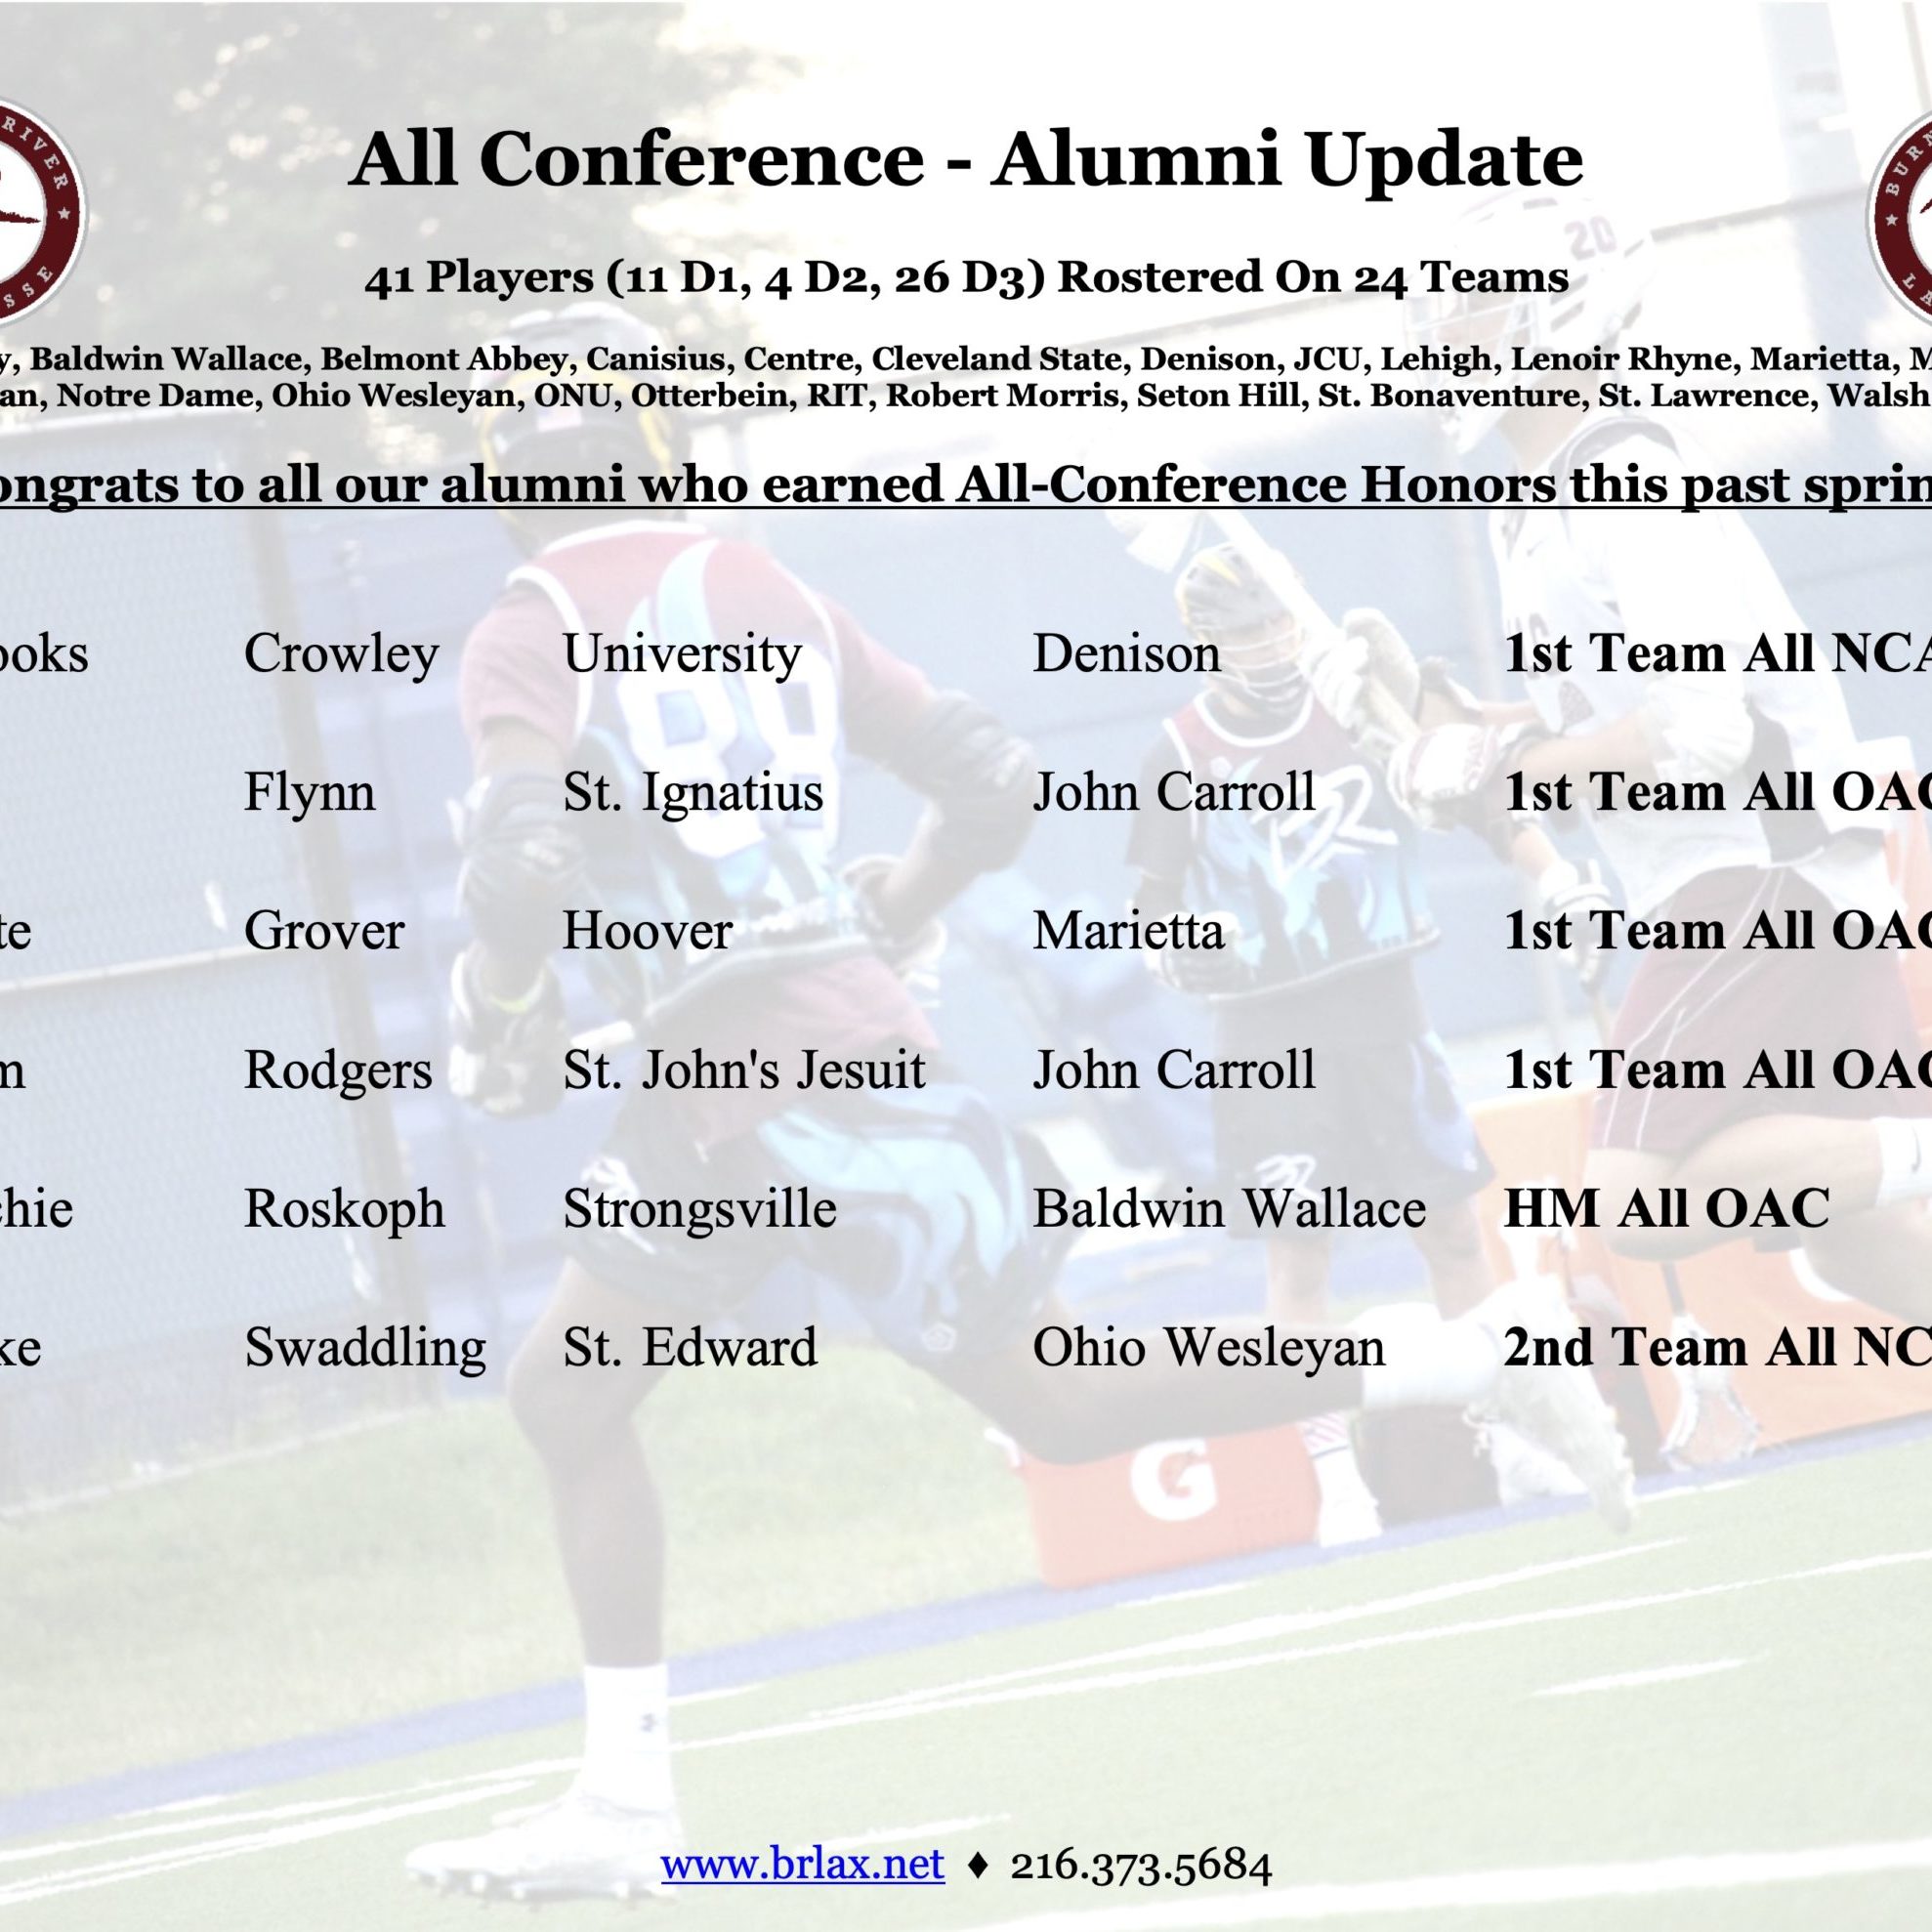 220608 Alumni Updates - All Conference